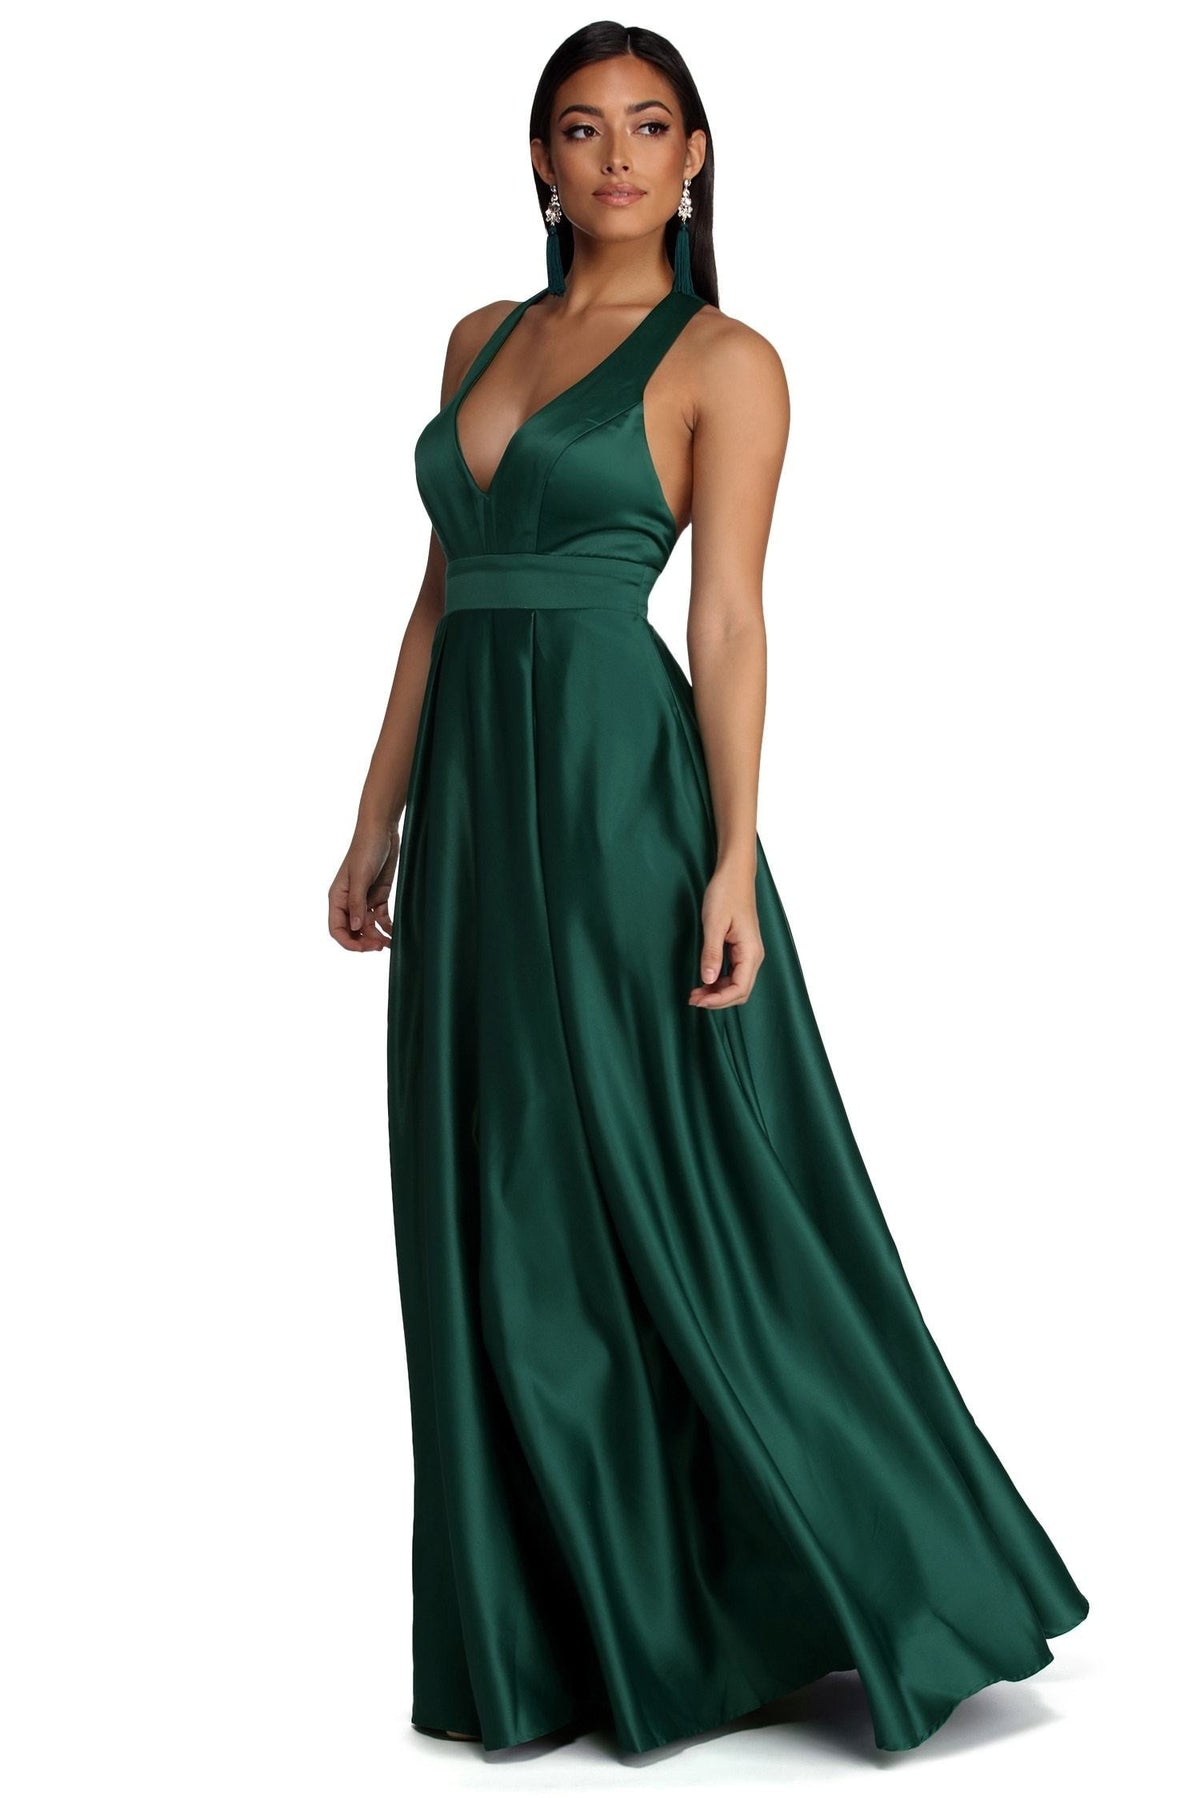 Elle Formal Satin Ball Gown - Lady Occasions